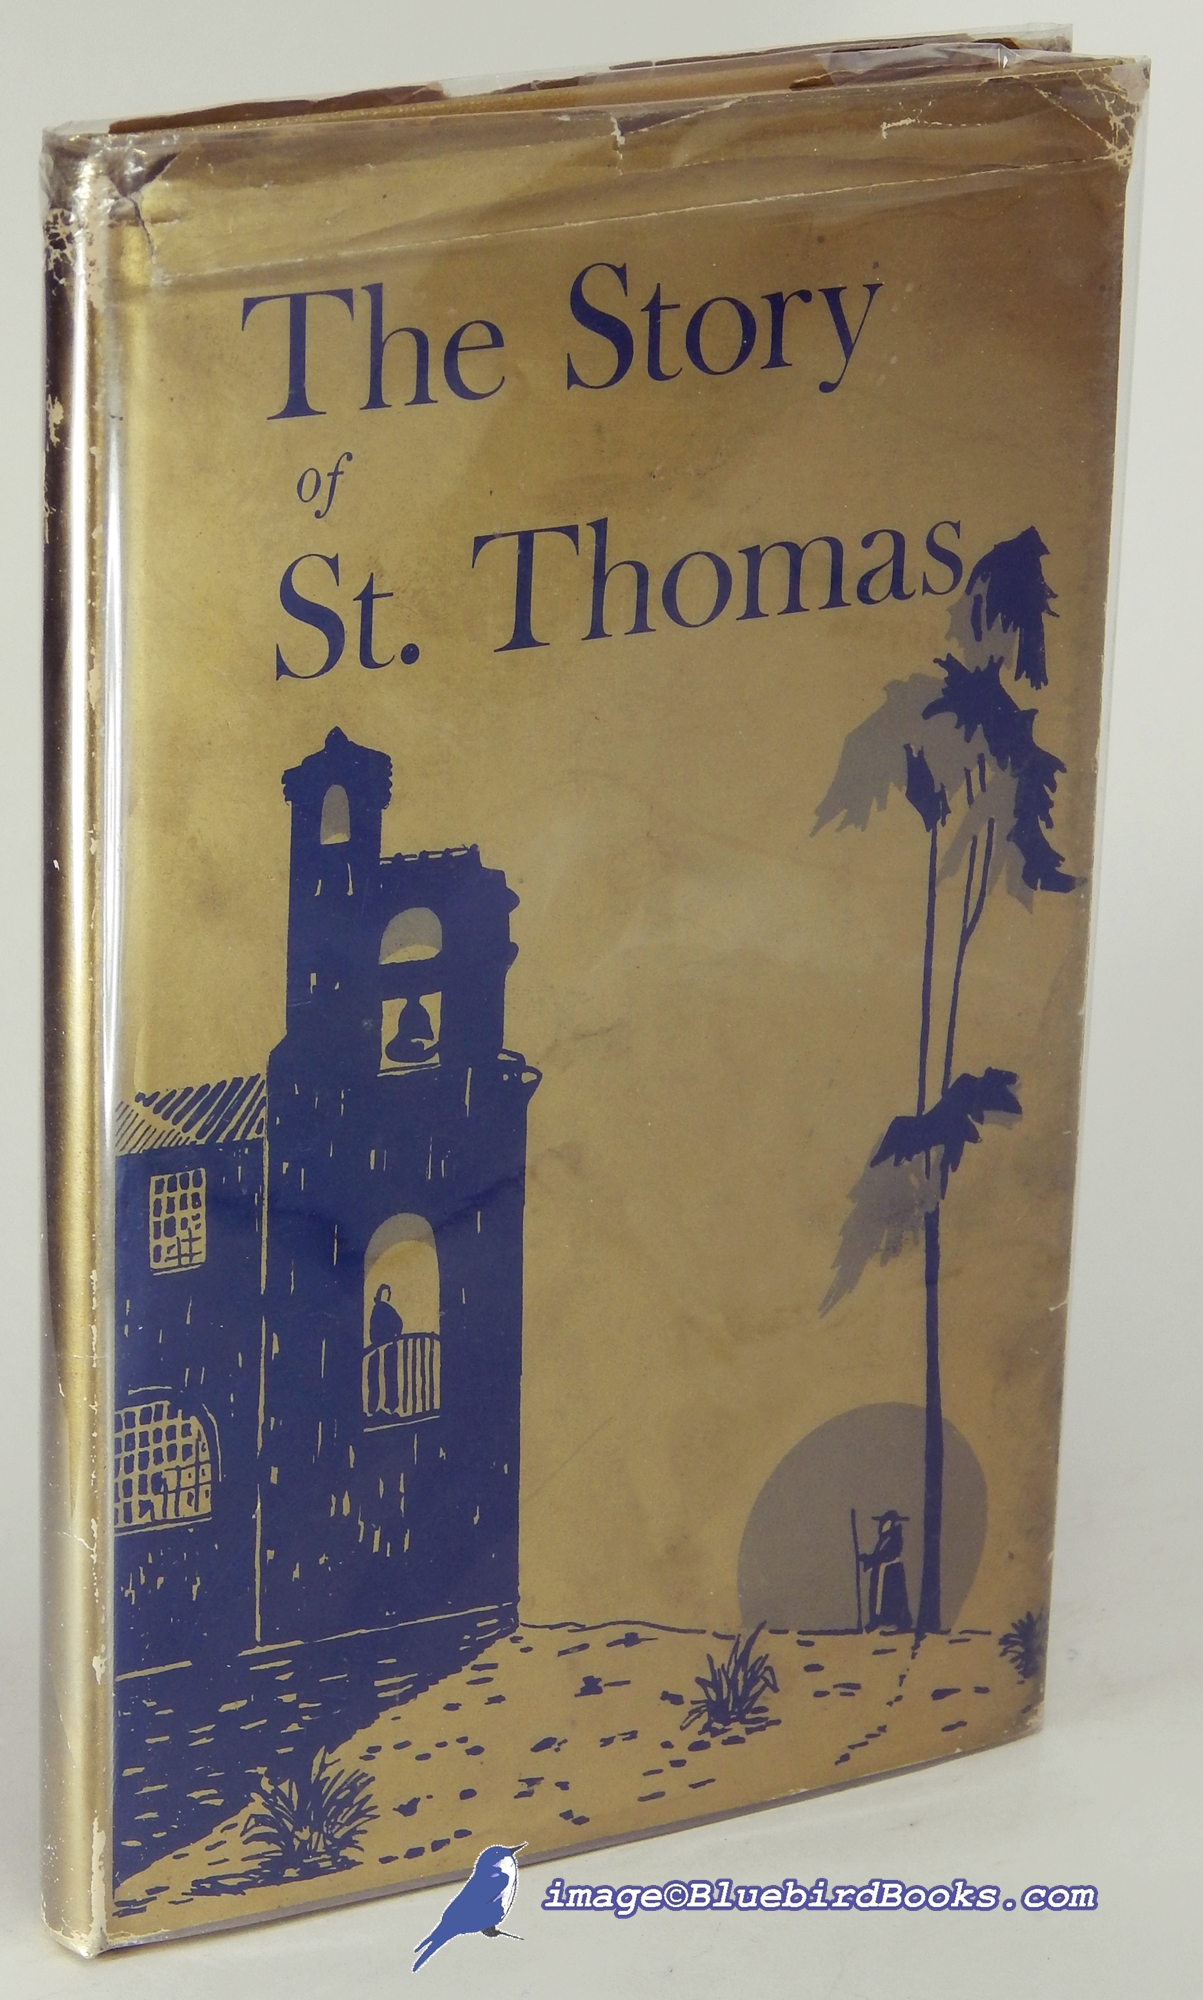 GOODIER, GEORGE P. (FIRST EDITION); MOORE, CLARENCE CULVER (SECOND EDITION) - The Story of St. Thomas Church (Park Hill Denver): Mission to Parish 1908 - 1916 - 1966